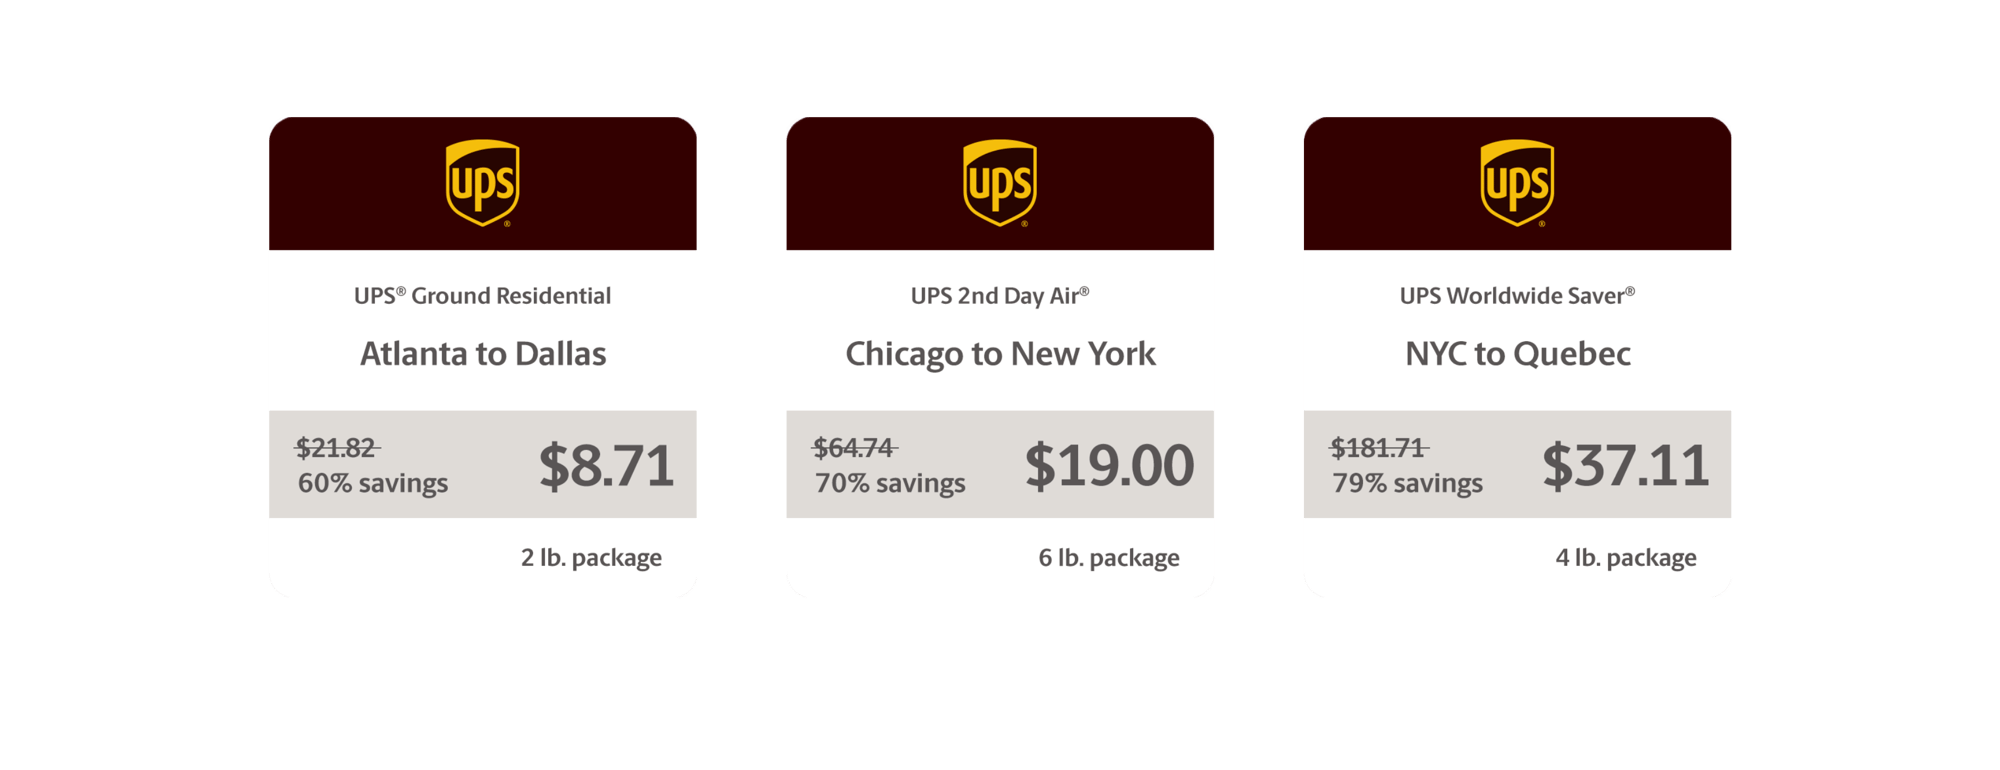 Example discounted rate of 60% off UPS® Ground Residential shipment from Atlanta to Dallas, Example discounted rate of 70% off UPS® 2nd Day Air shipment from Chicago to New York, Example discounted rate of 79% off UPS® Worldwide Saver shipment from NYC to Quebec